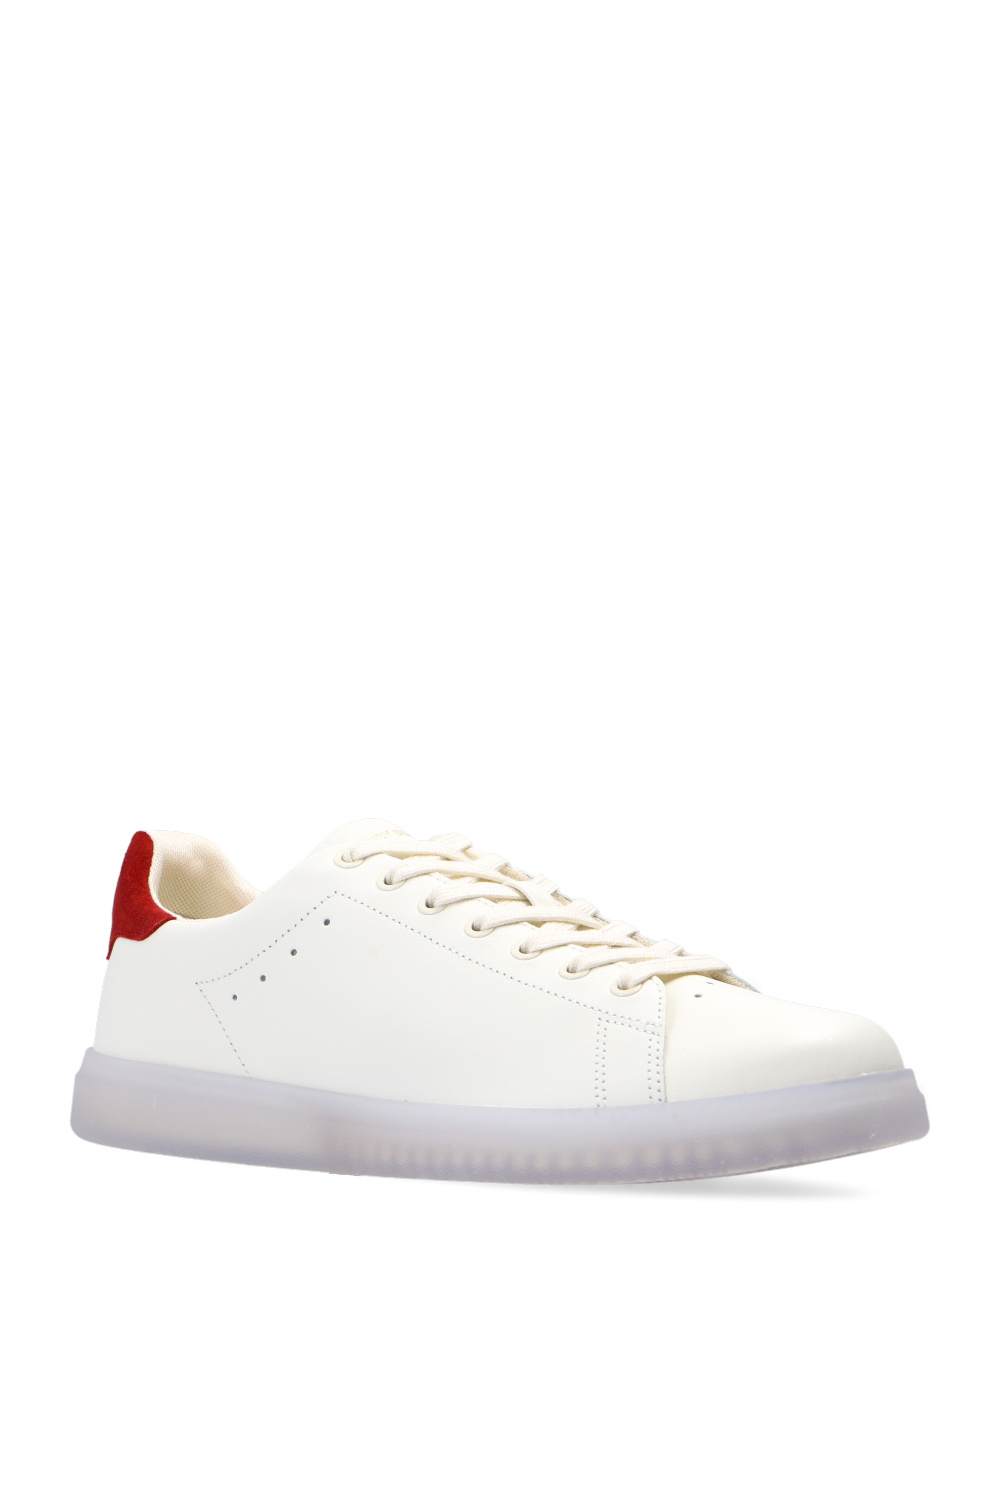 Howell Court' sneakers Tory Burch - IetpShops Pakistan - Sneakers con  strass Chicco